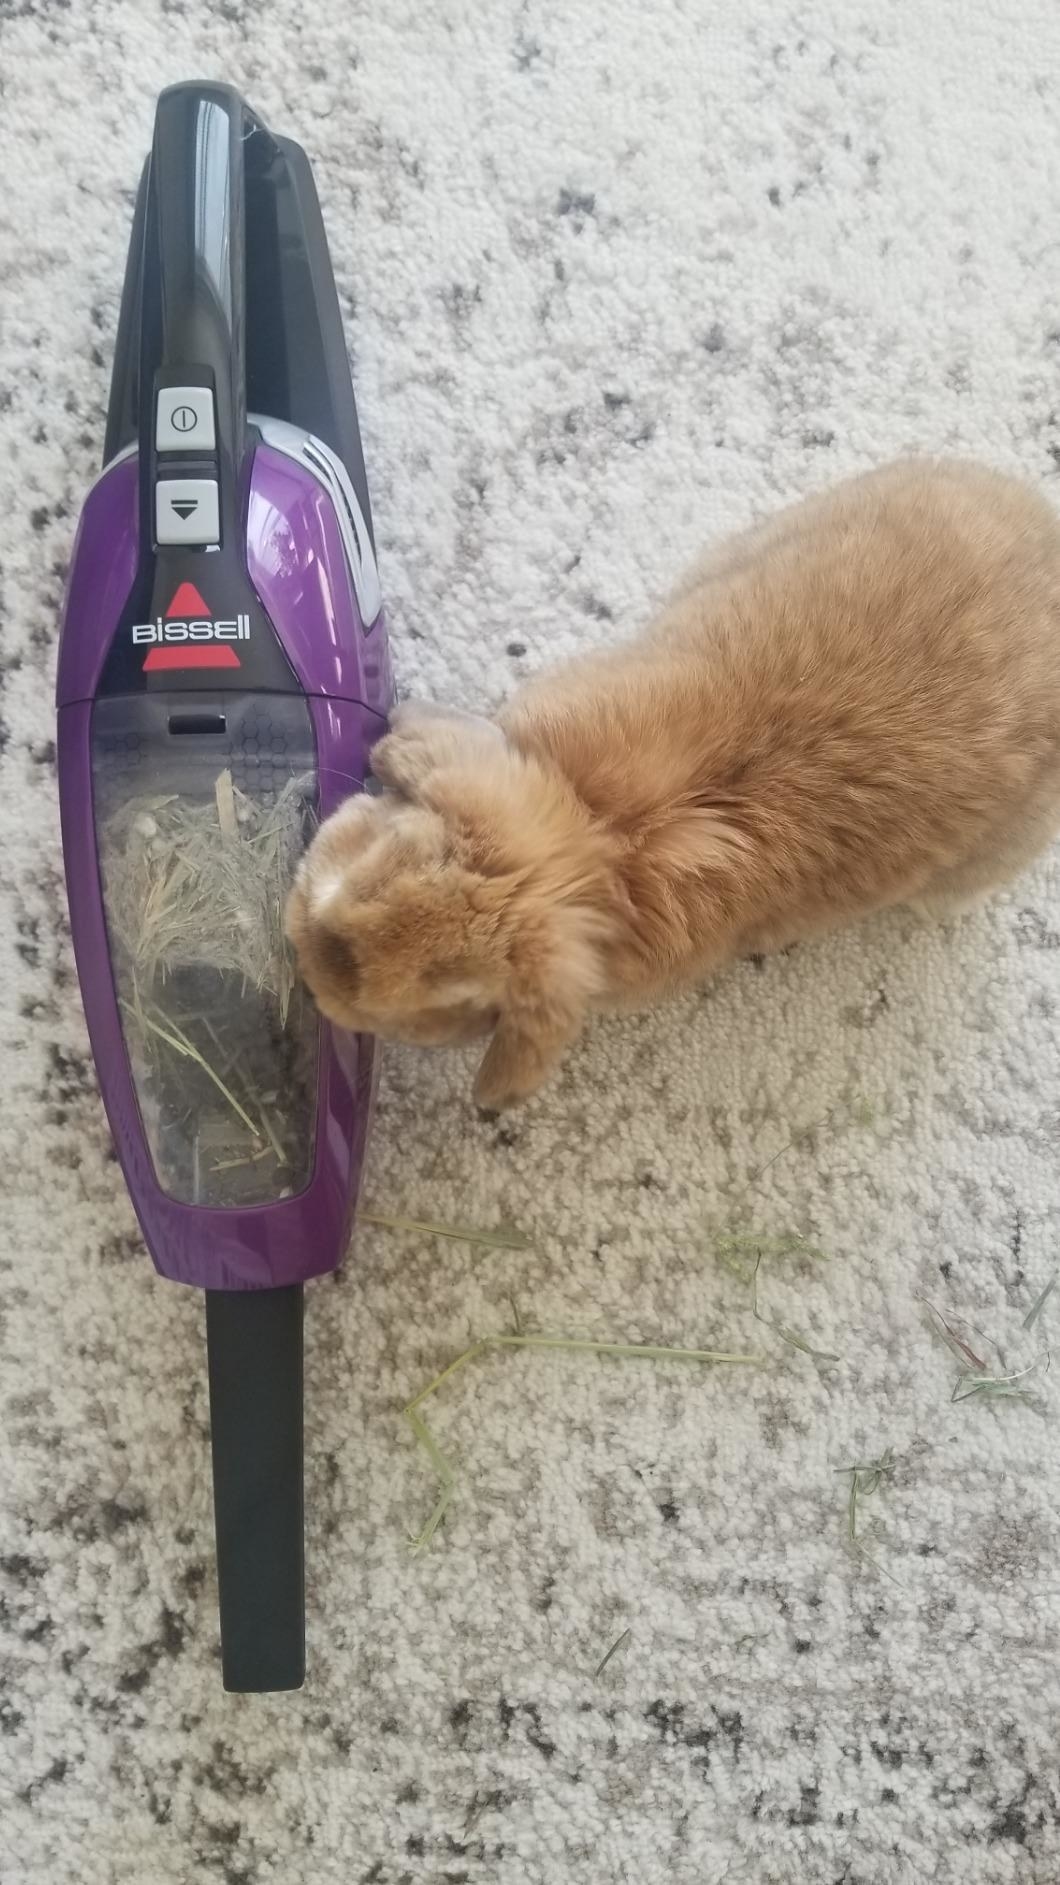 A bunny next to the full vacuum